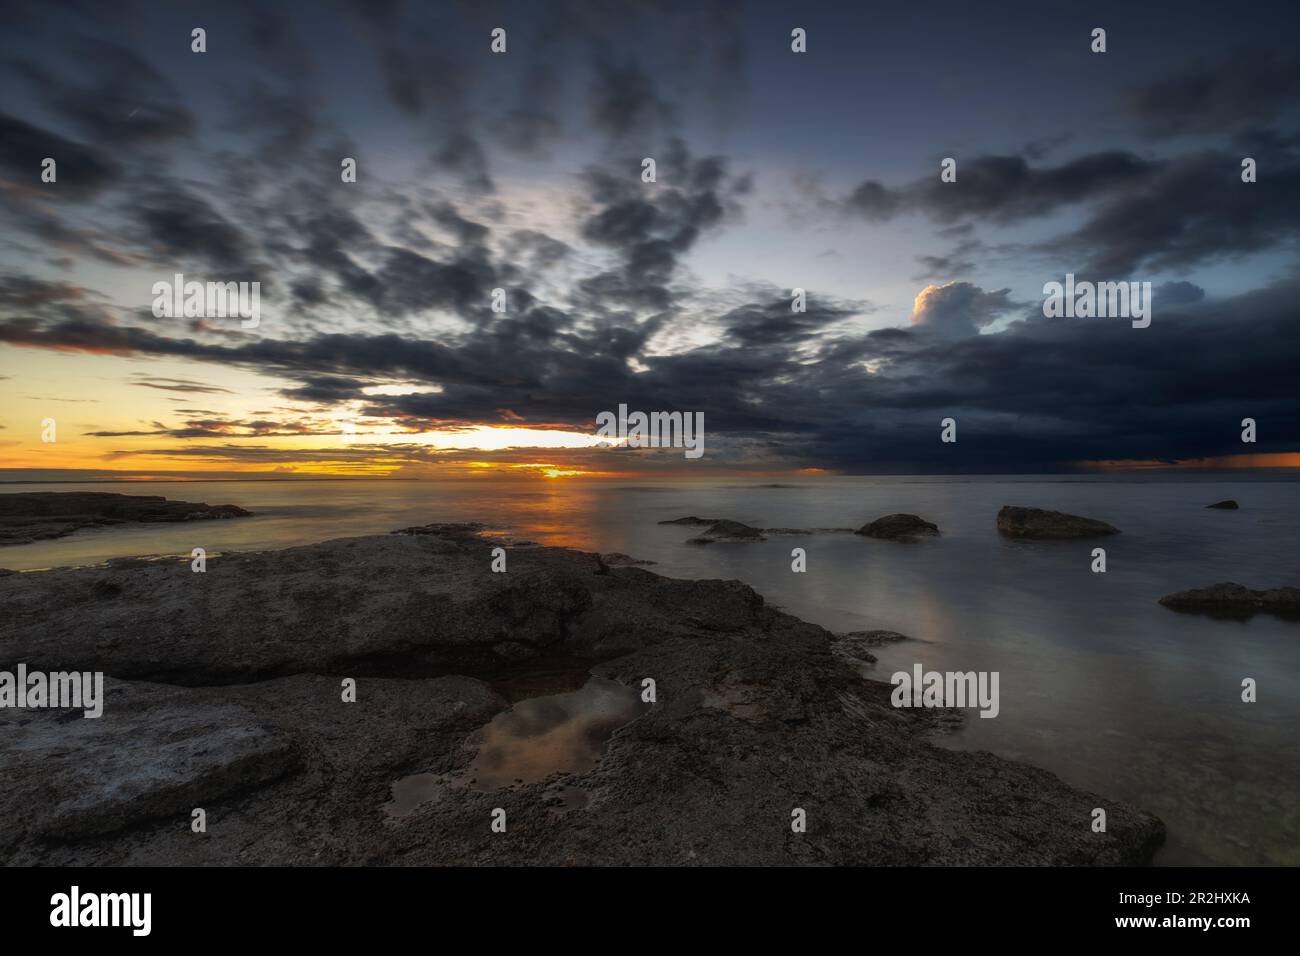 sunset at the sea. Rocky. rain cloud in the background. afterglow. Sky reflects in the water. Lauterhorn, Gotland, Sweden. Stock Photo